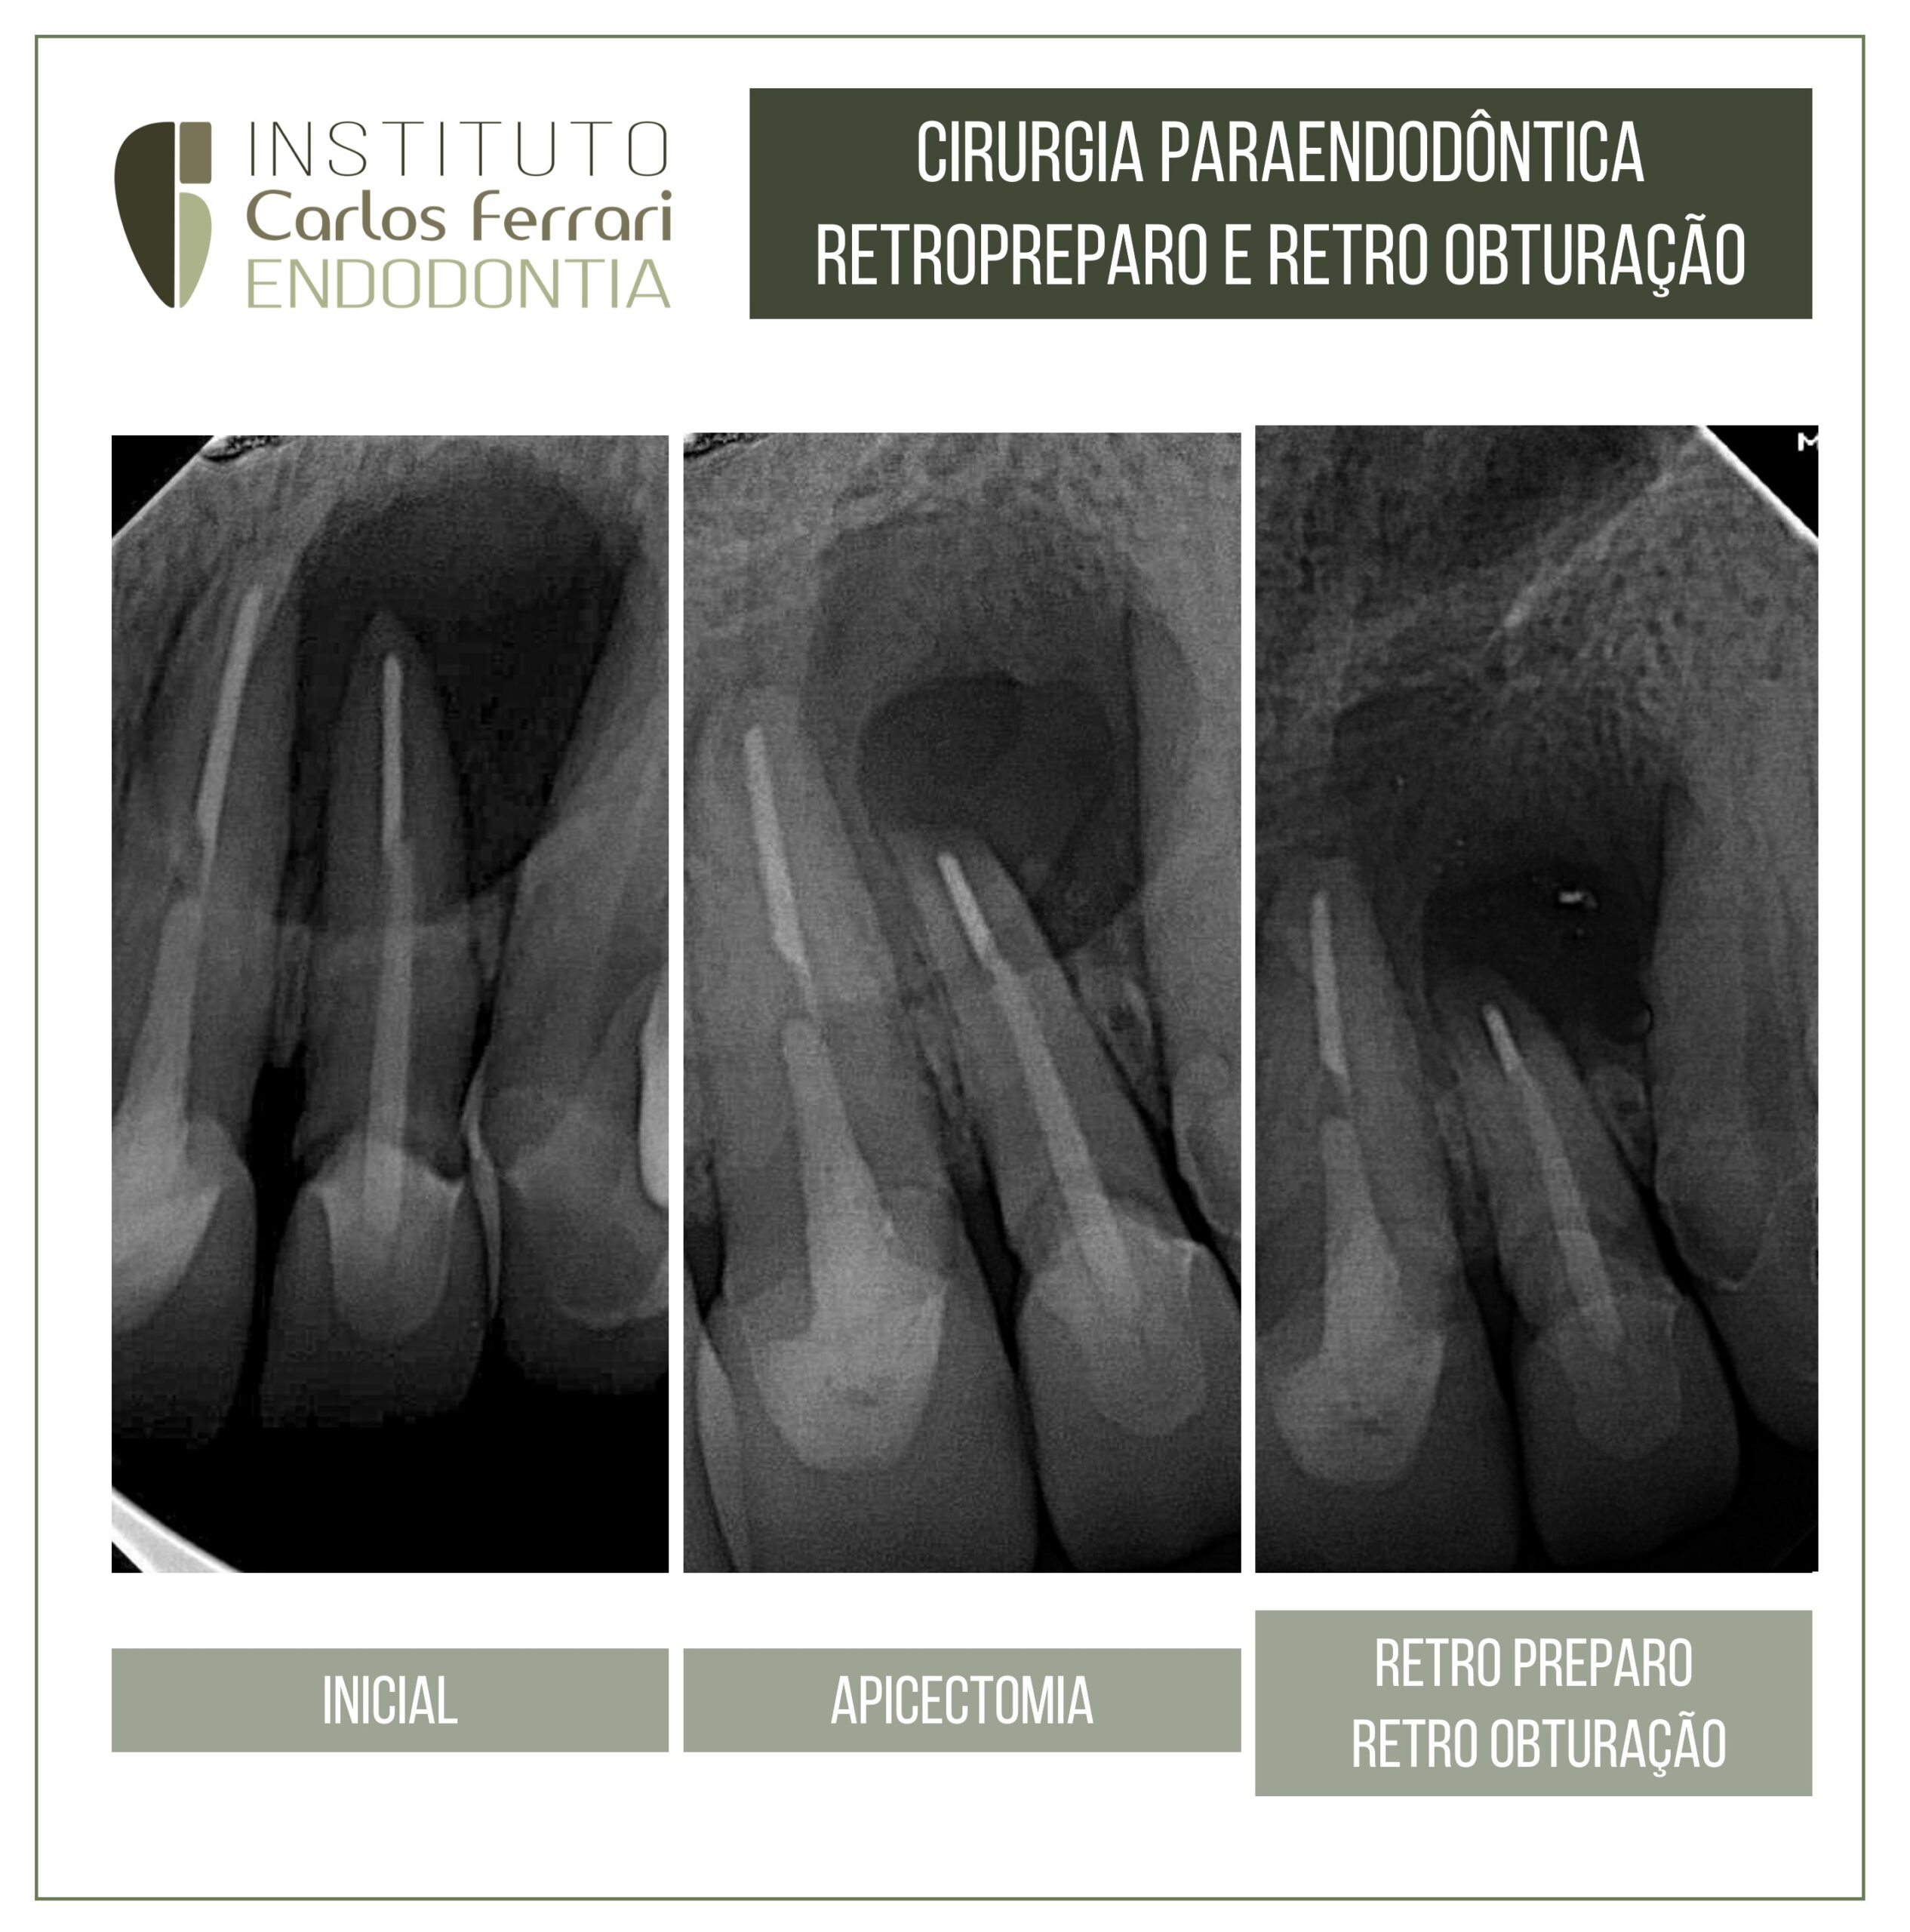 You are currently viewing Paraendodontic surgery retropreparation.